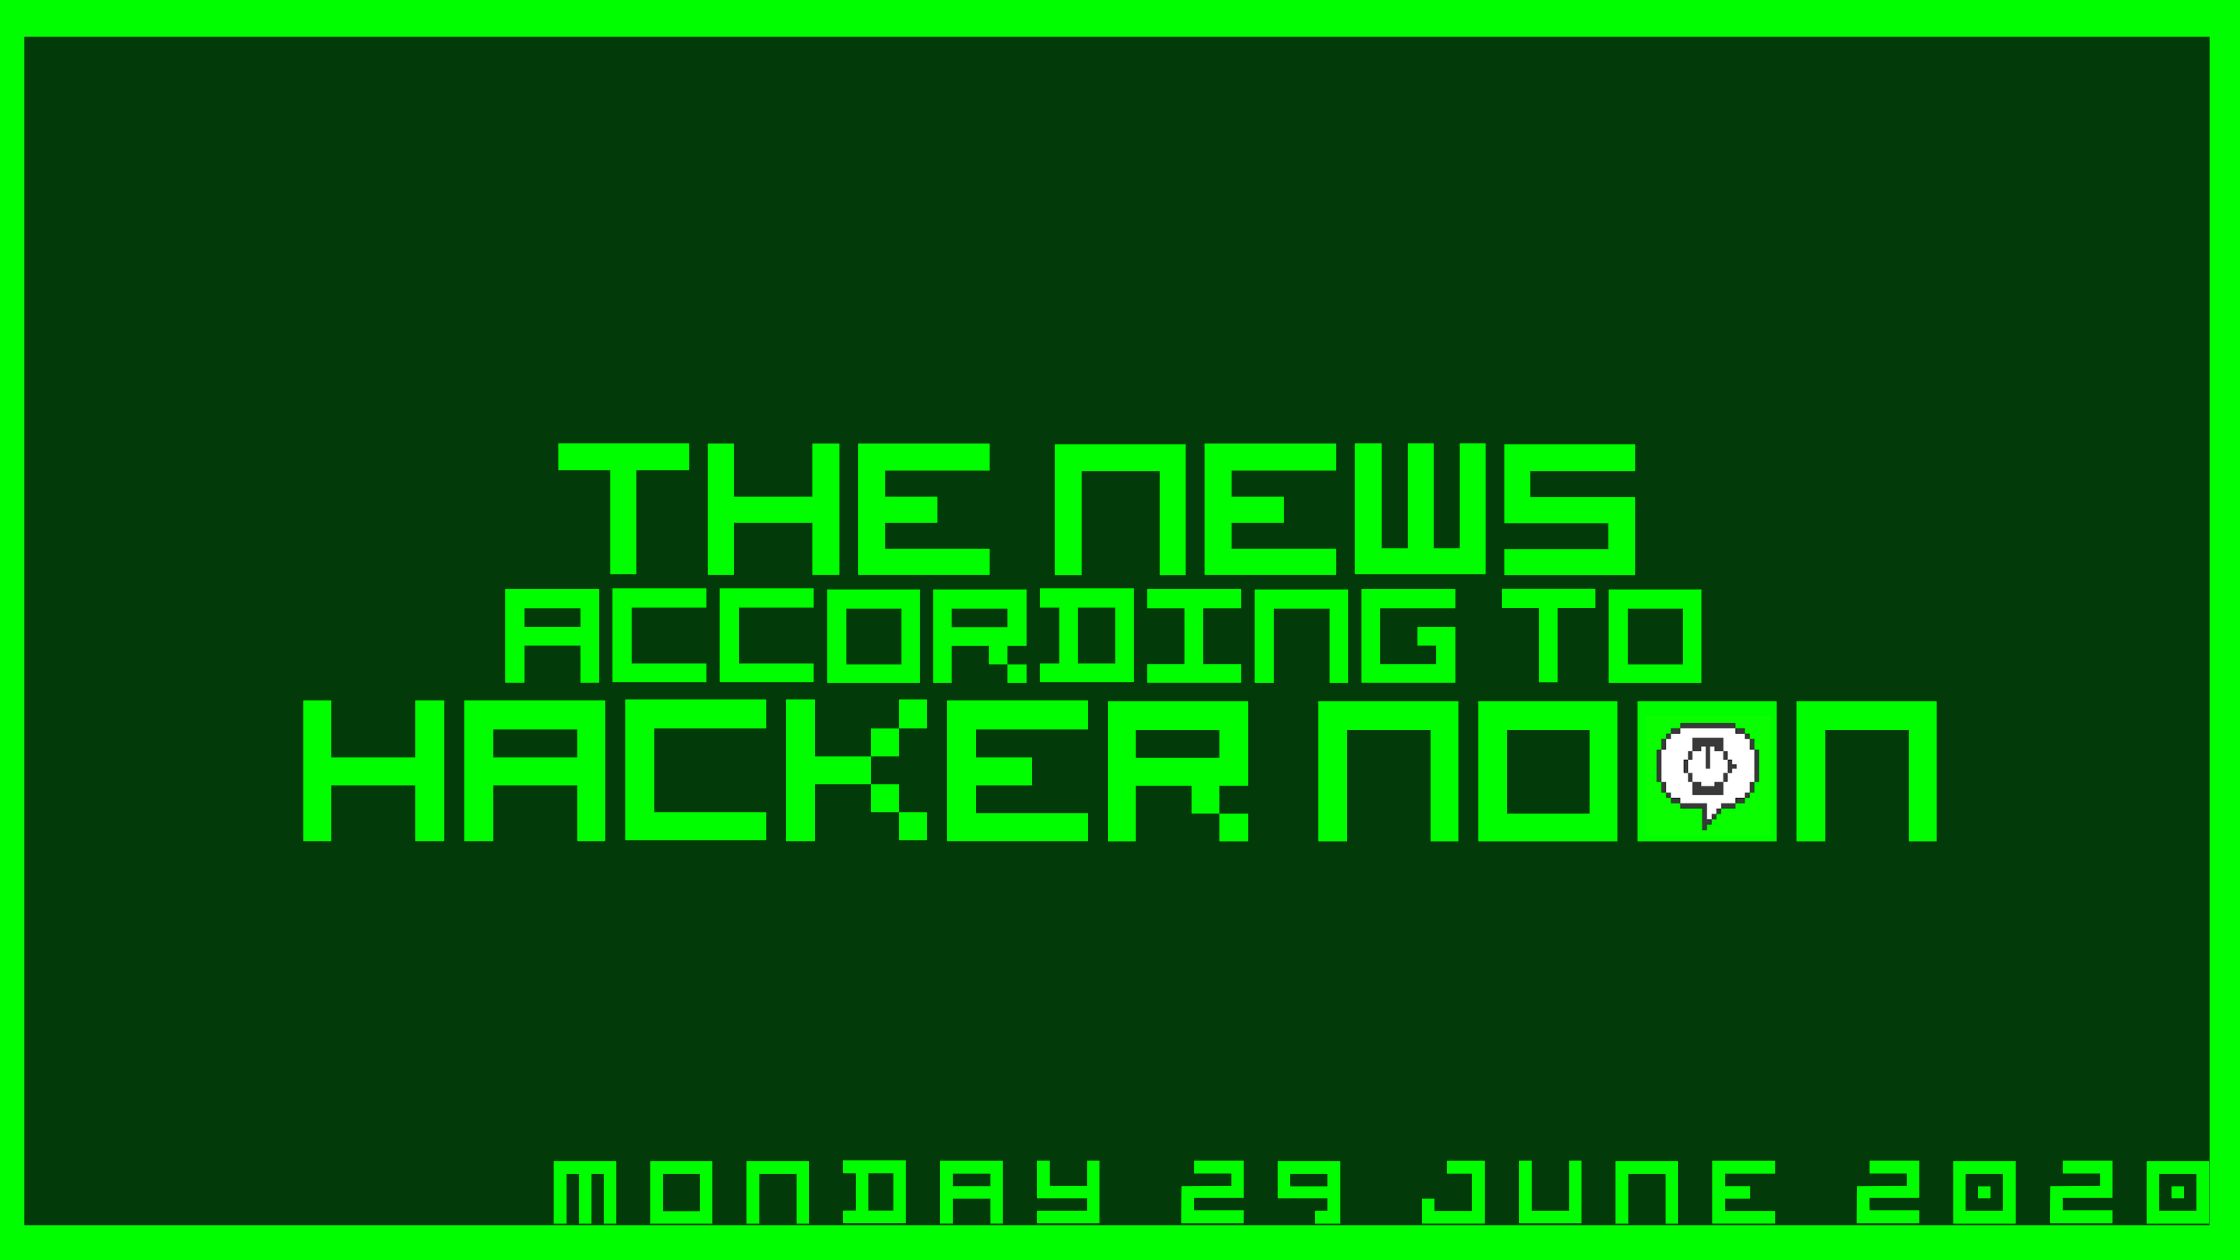 featured image - The News According to Hacker Noon - Monday 29 June, 2020